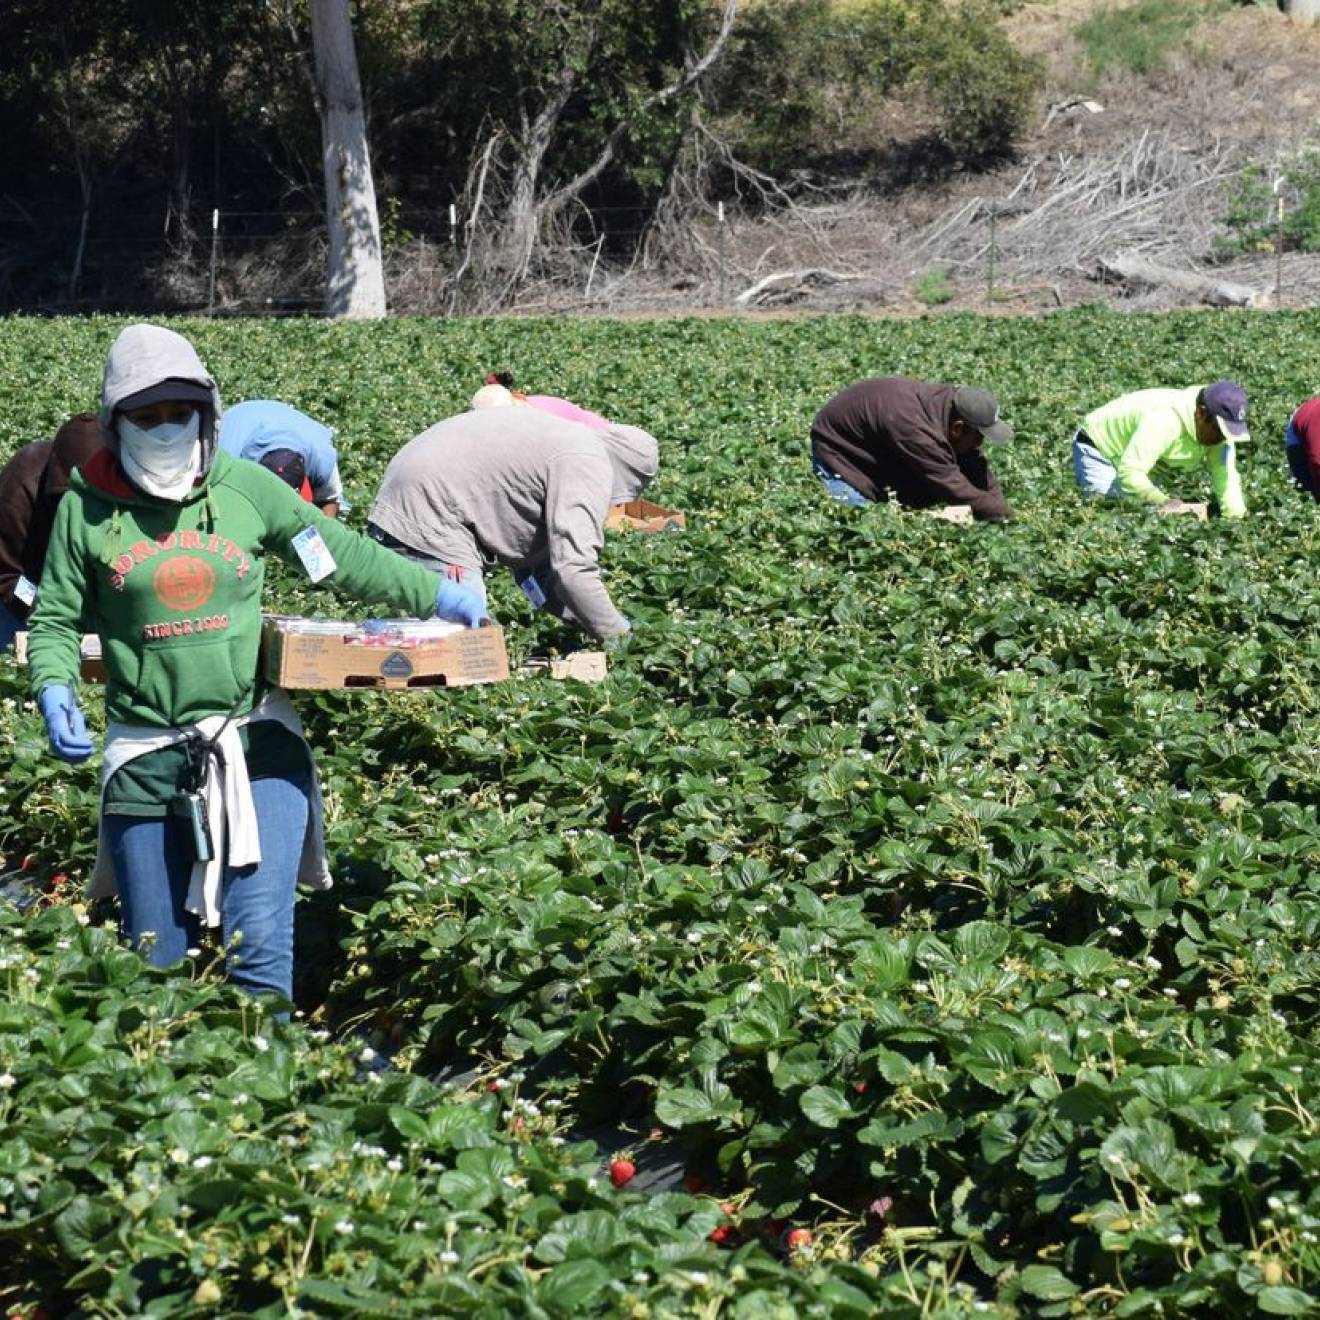 Agricultural workers in Salinas